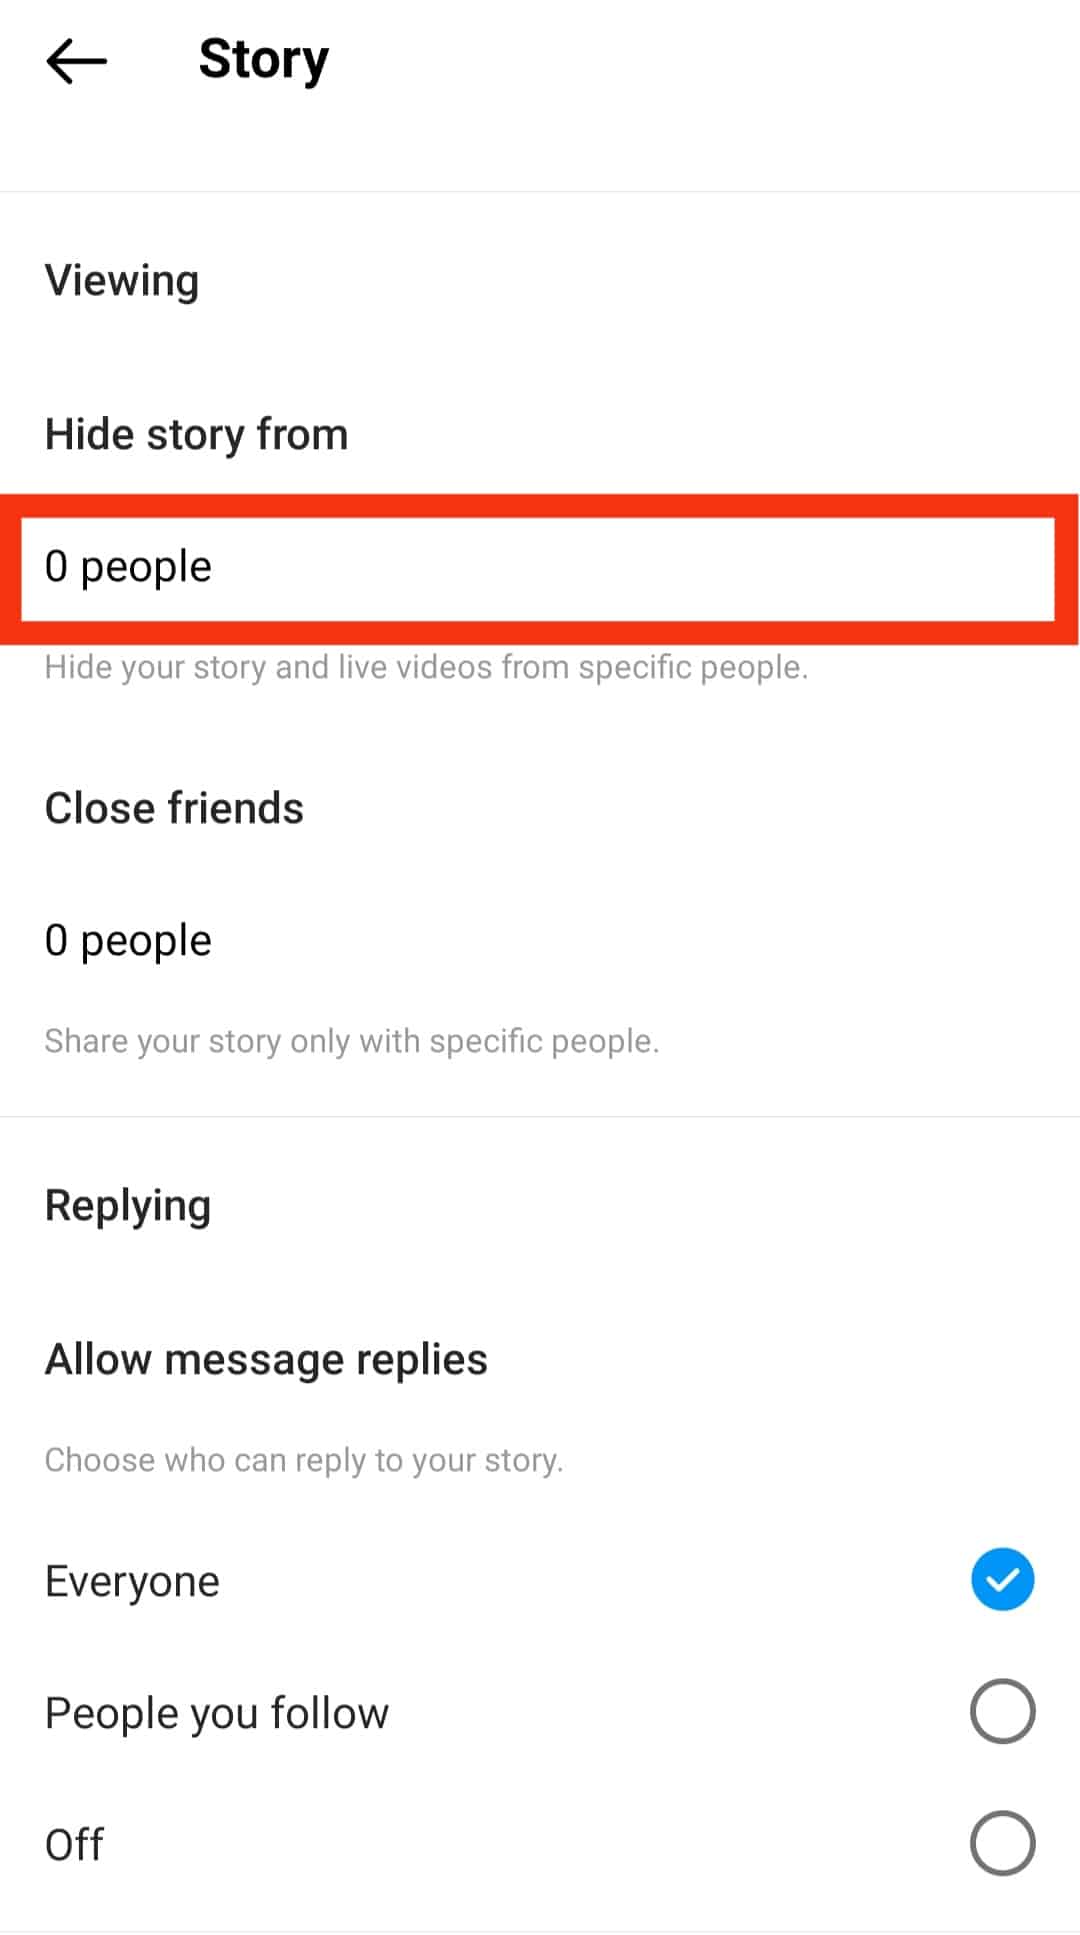 Tap On People Under Hide Story From